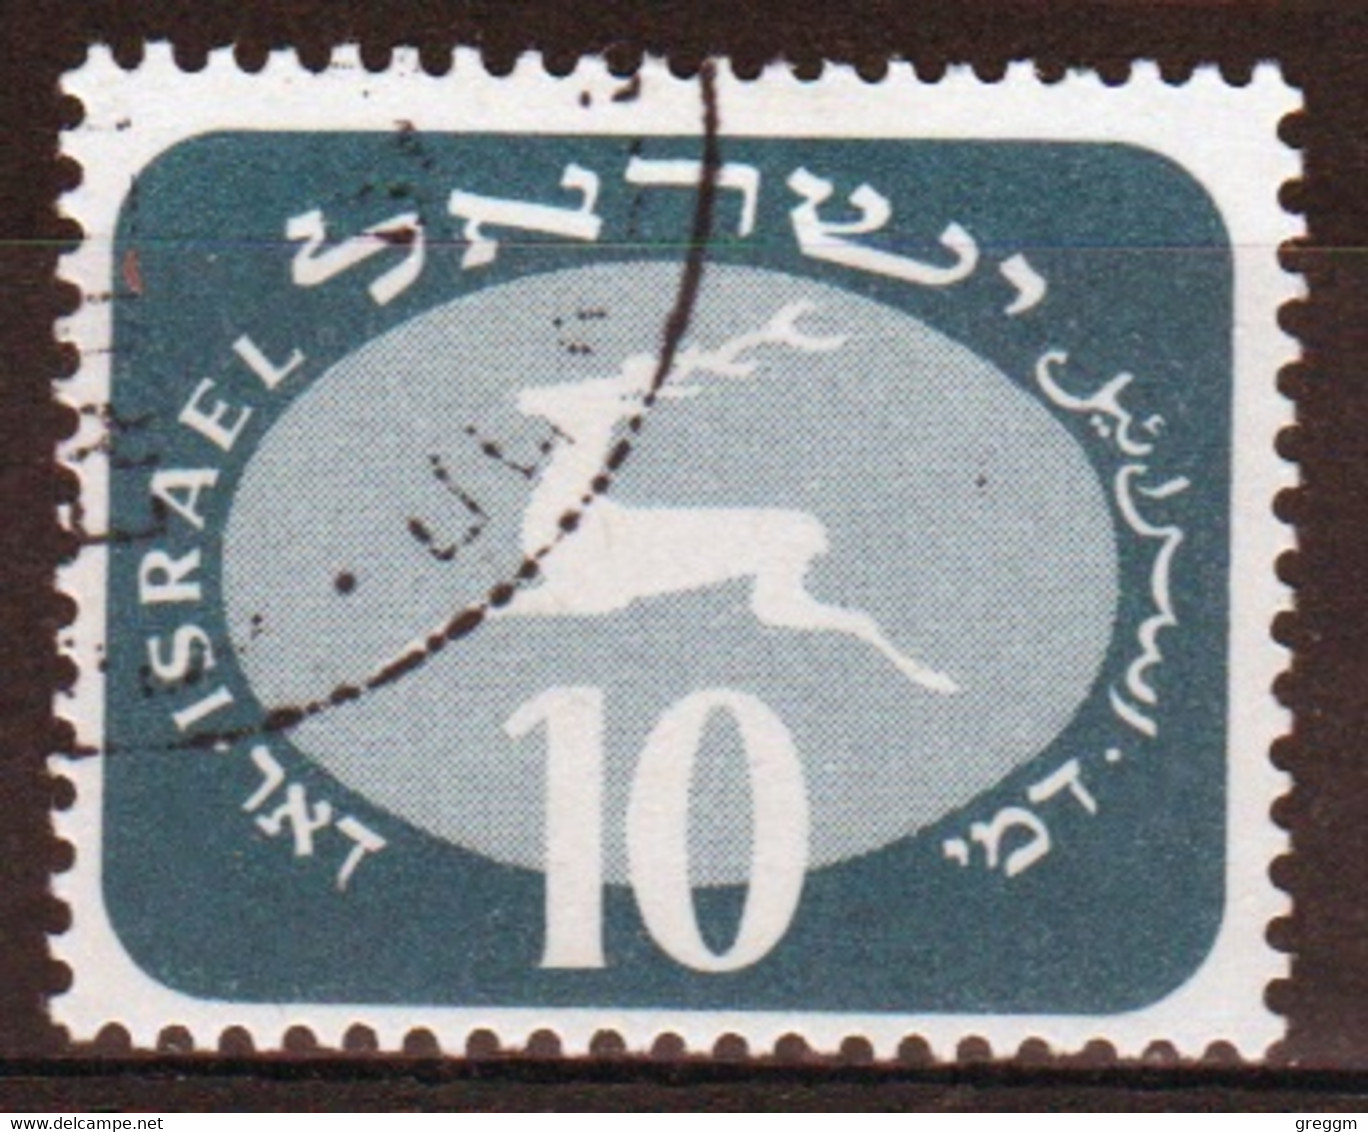 Israel 1952 Single Stamp From The Postage Due Set Issued In Fine Used. - Postage Due